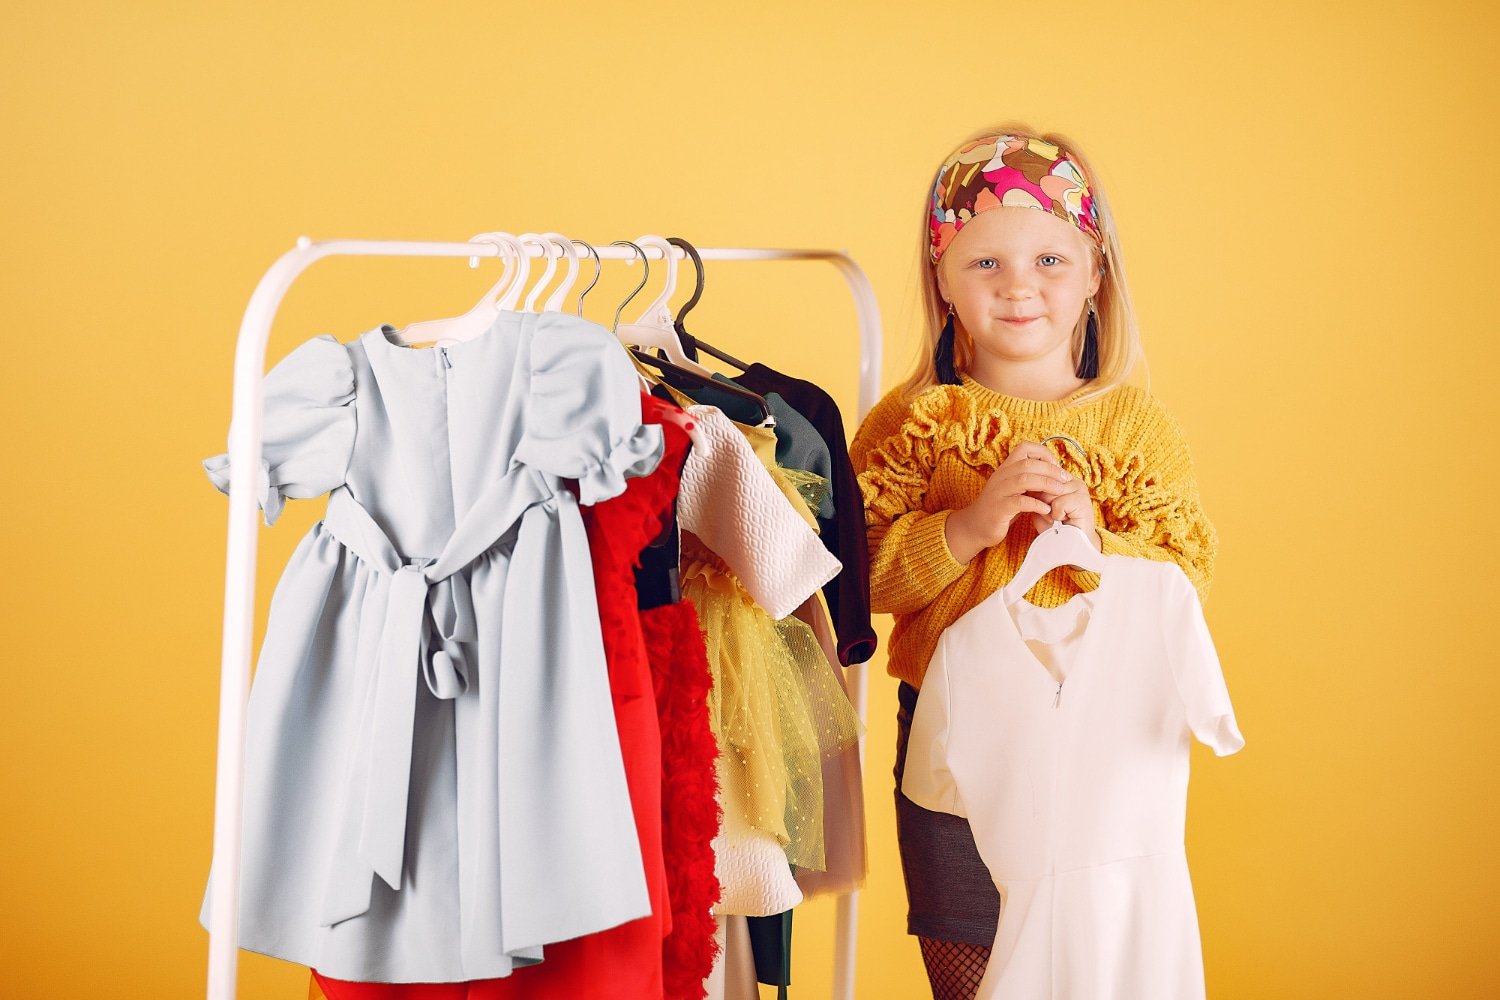 Shop For Stylish Children’s Apparel At KIDLY